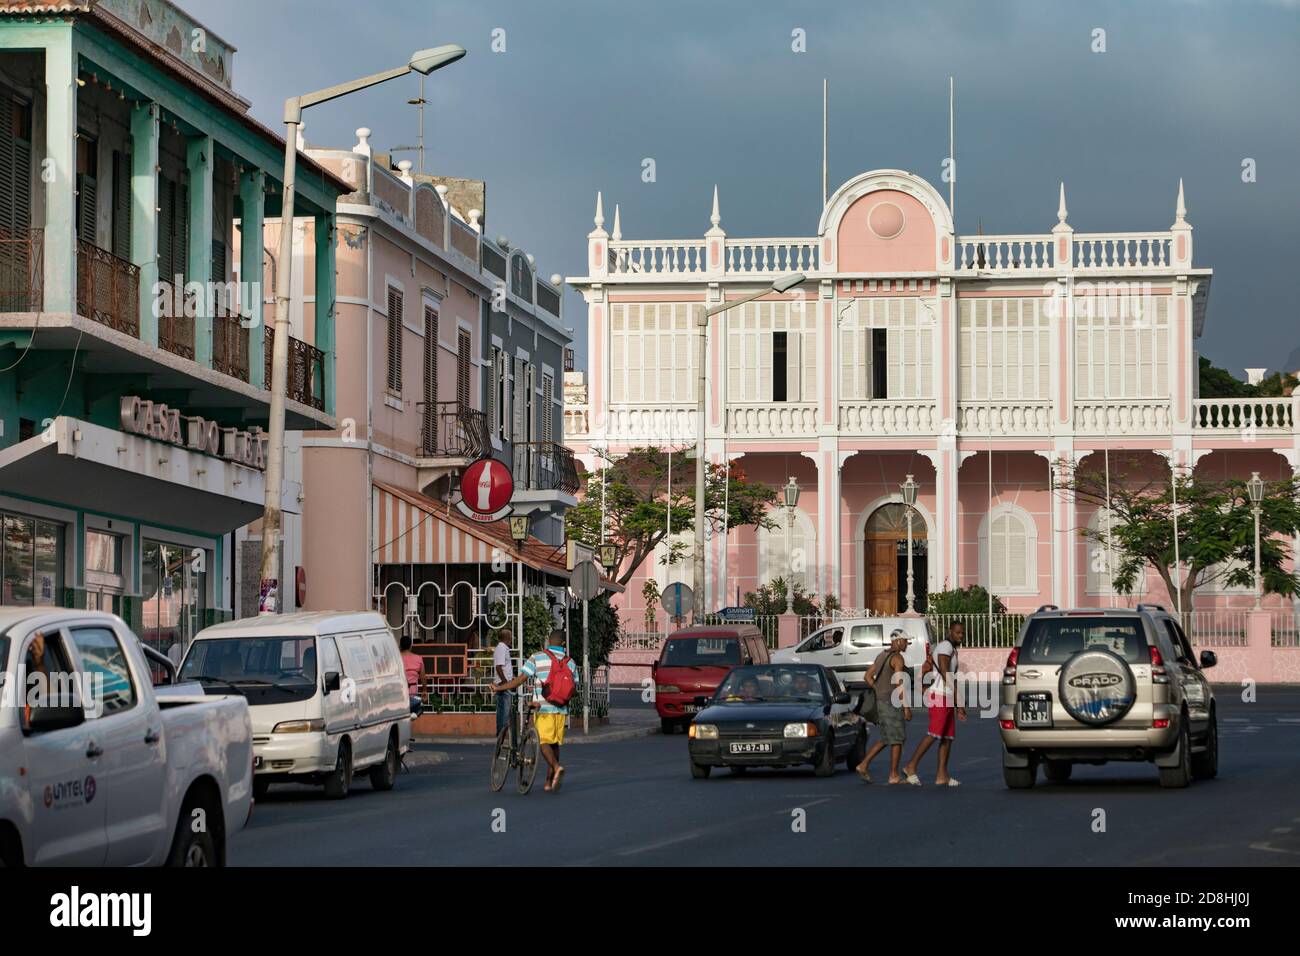 Busy street scene in Mindelo city showing People's Palace on the island of Sao Vicente, Cape Verde, Africa. Stock Photo